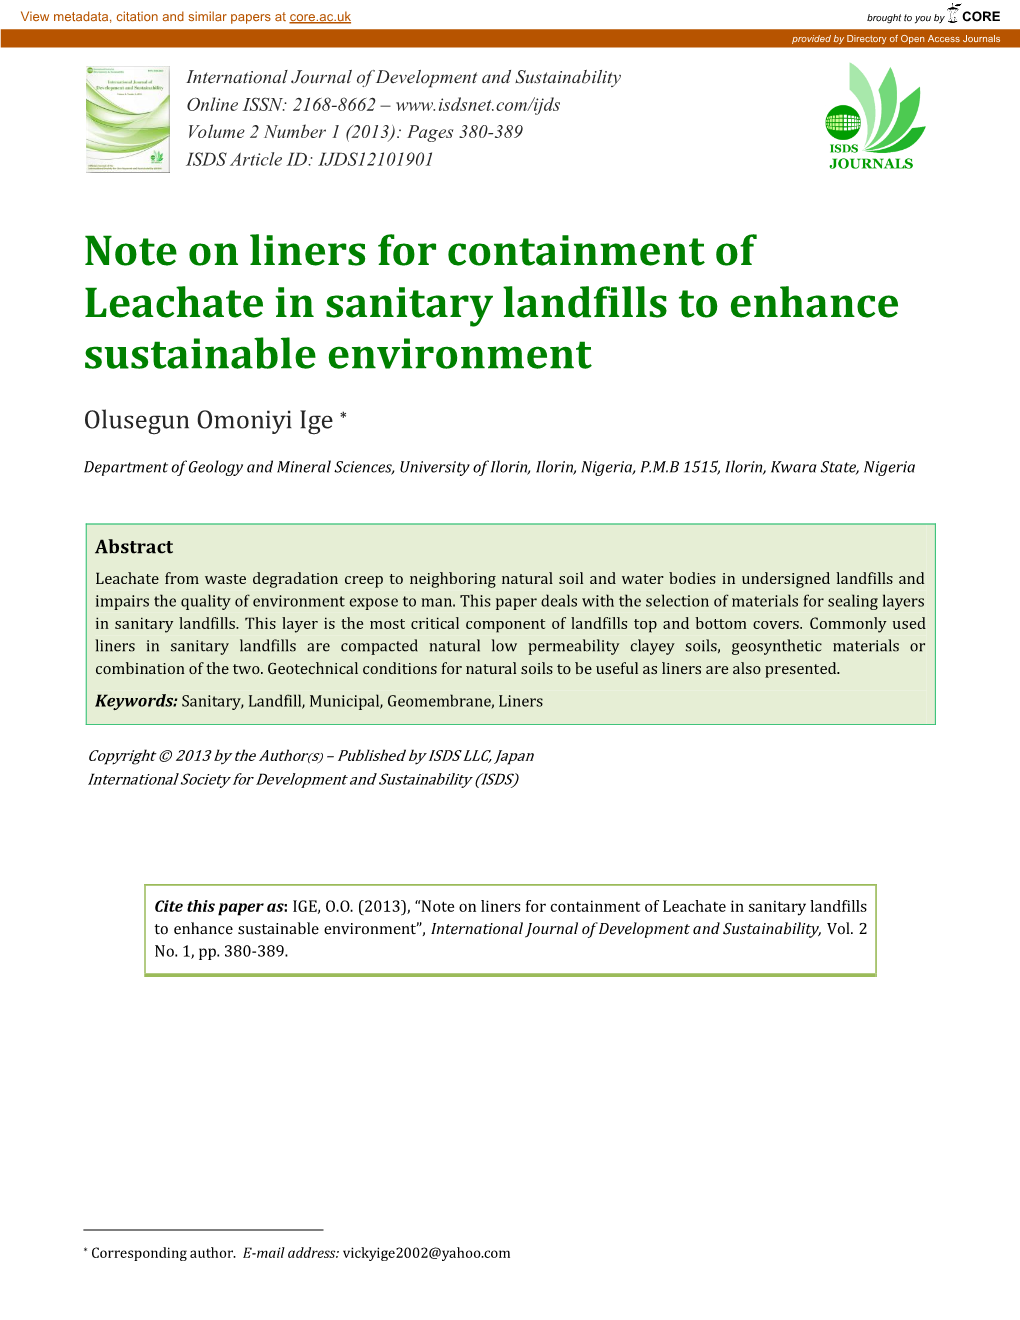 Note on Liners for Containment of Leachate in Sanitary Landfills to Enhance Sustainable Environment